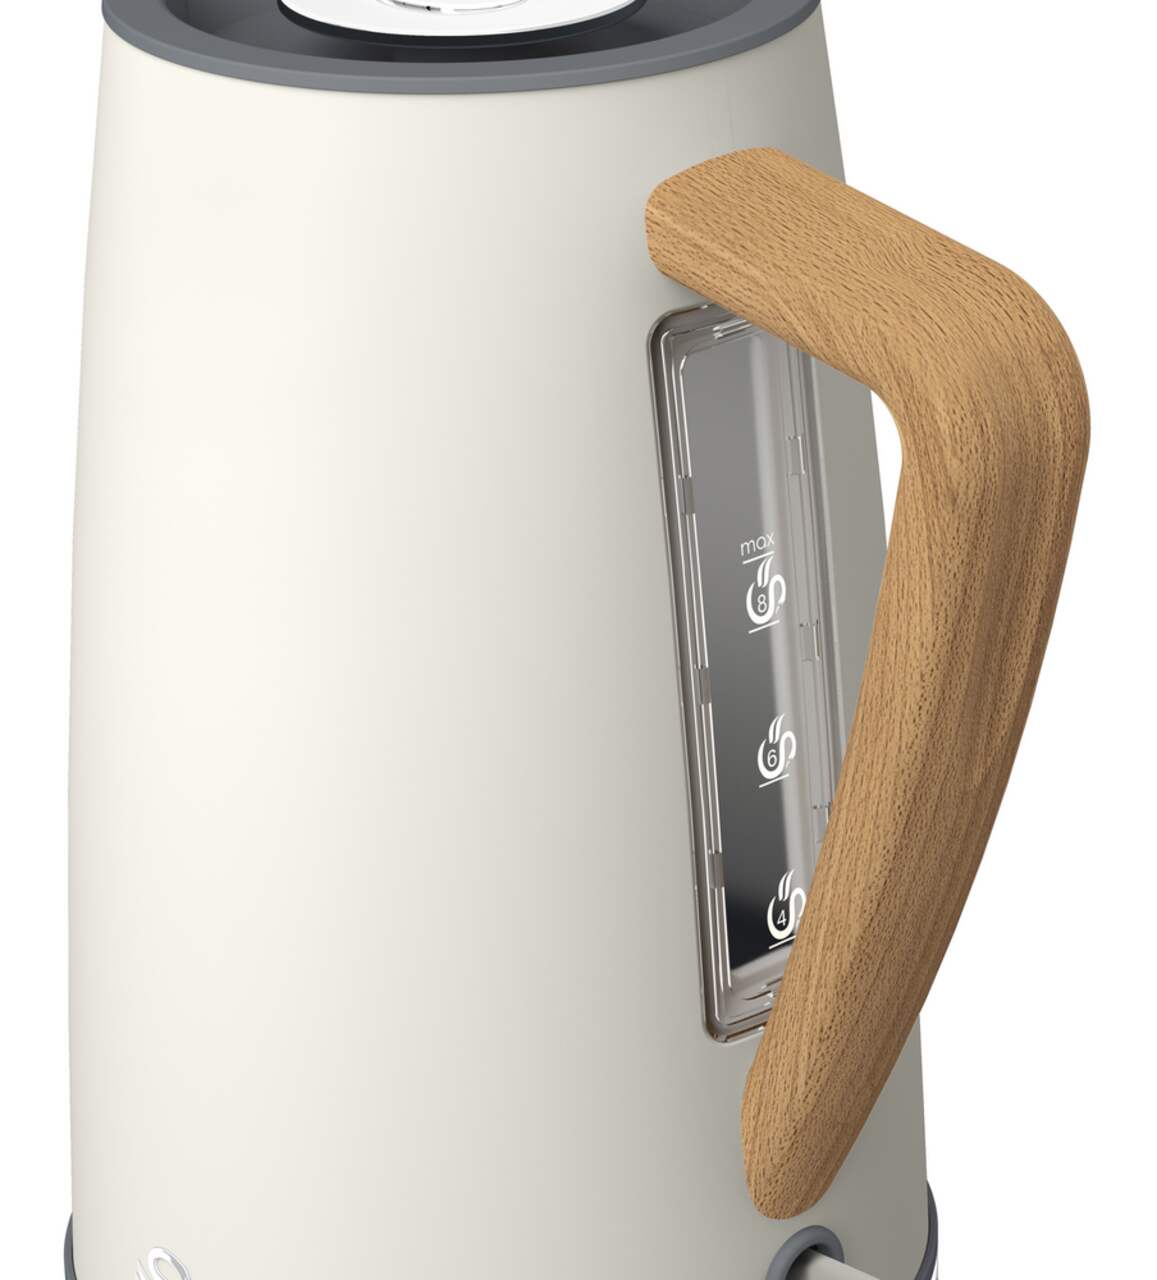 https://media-www.canadiantire.ca/product/living/kitchen/kitchen-appliances/0432763/swan-1-7l-kettle-c88c05ea-38be-4c51-8c6e-22716f925f20.png?imdensity=1&imwidth=1244&impolicy=mZoom